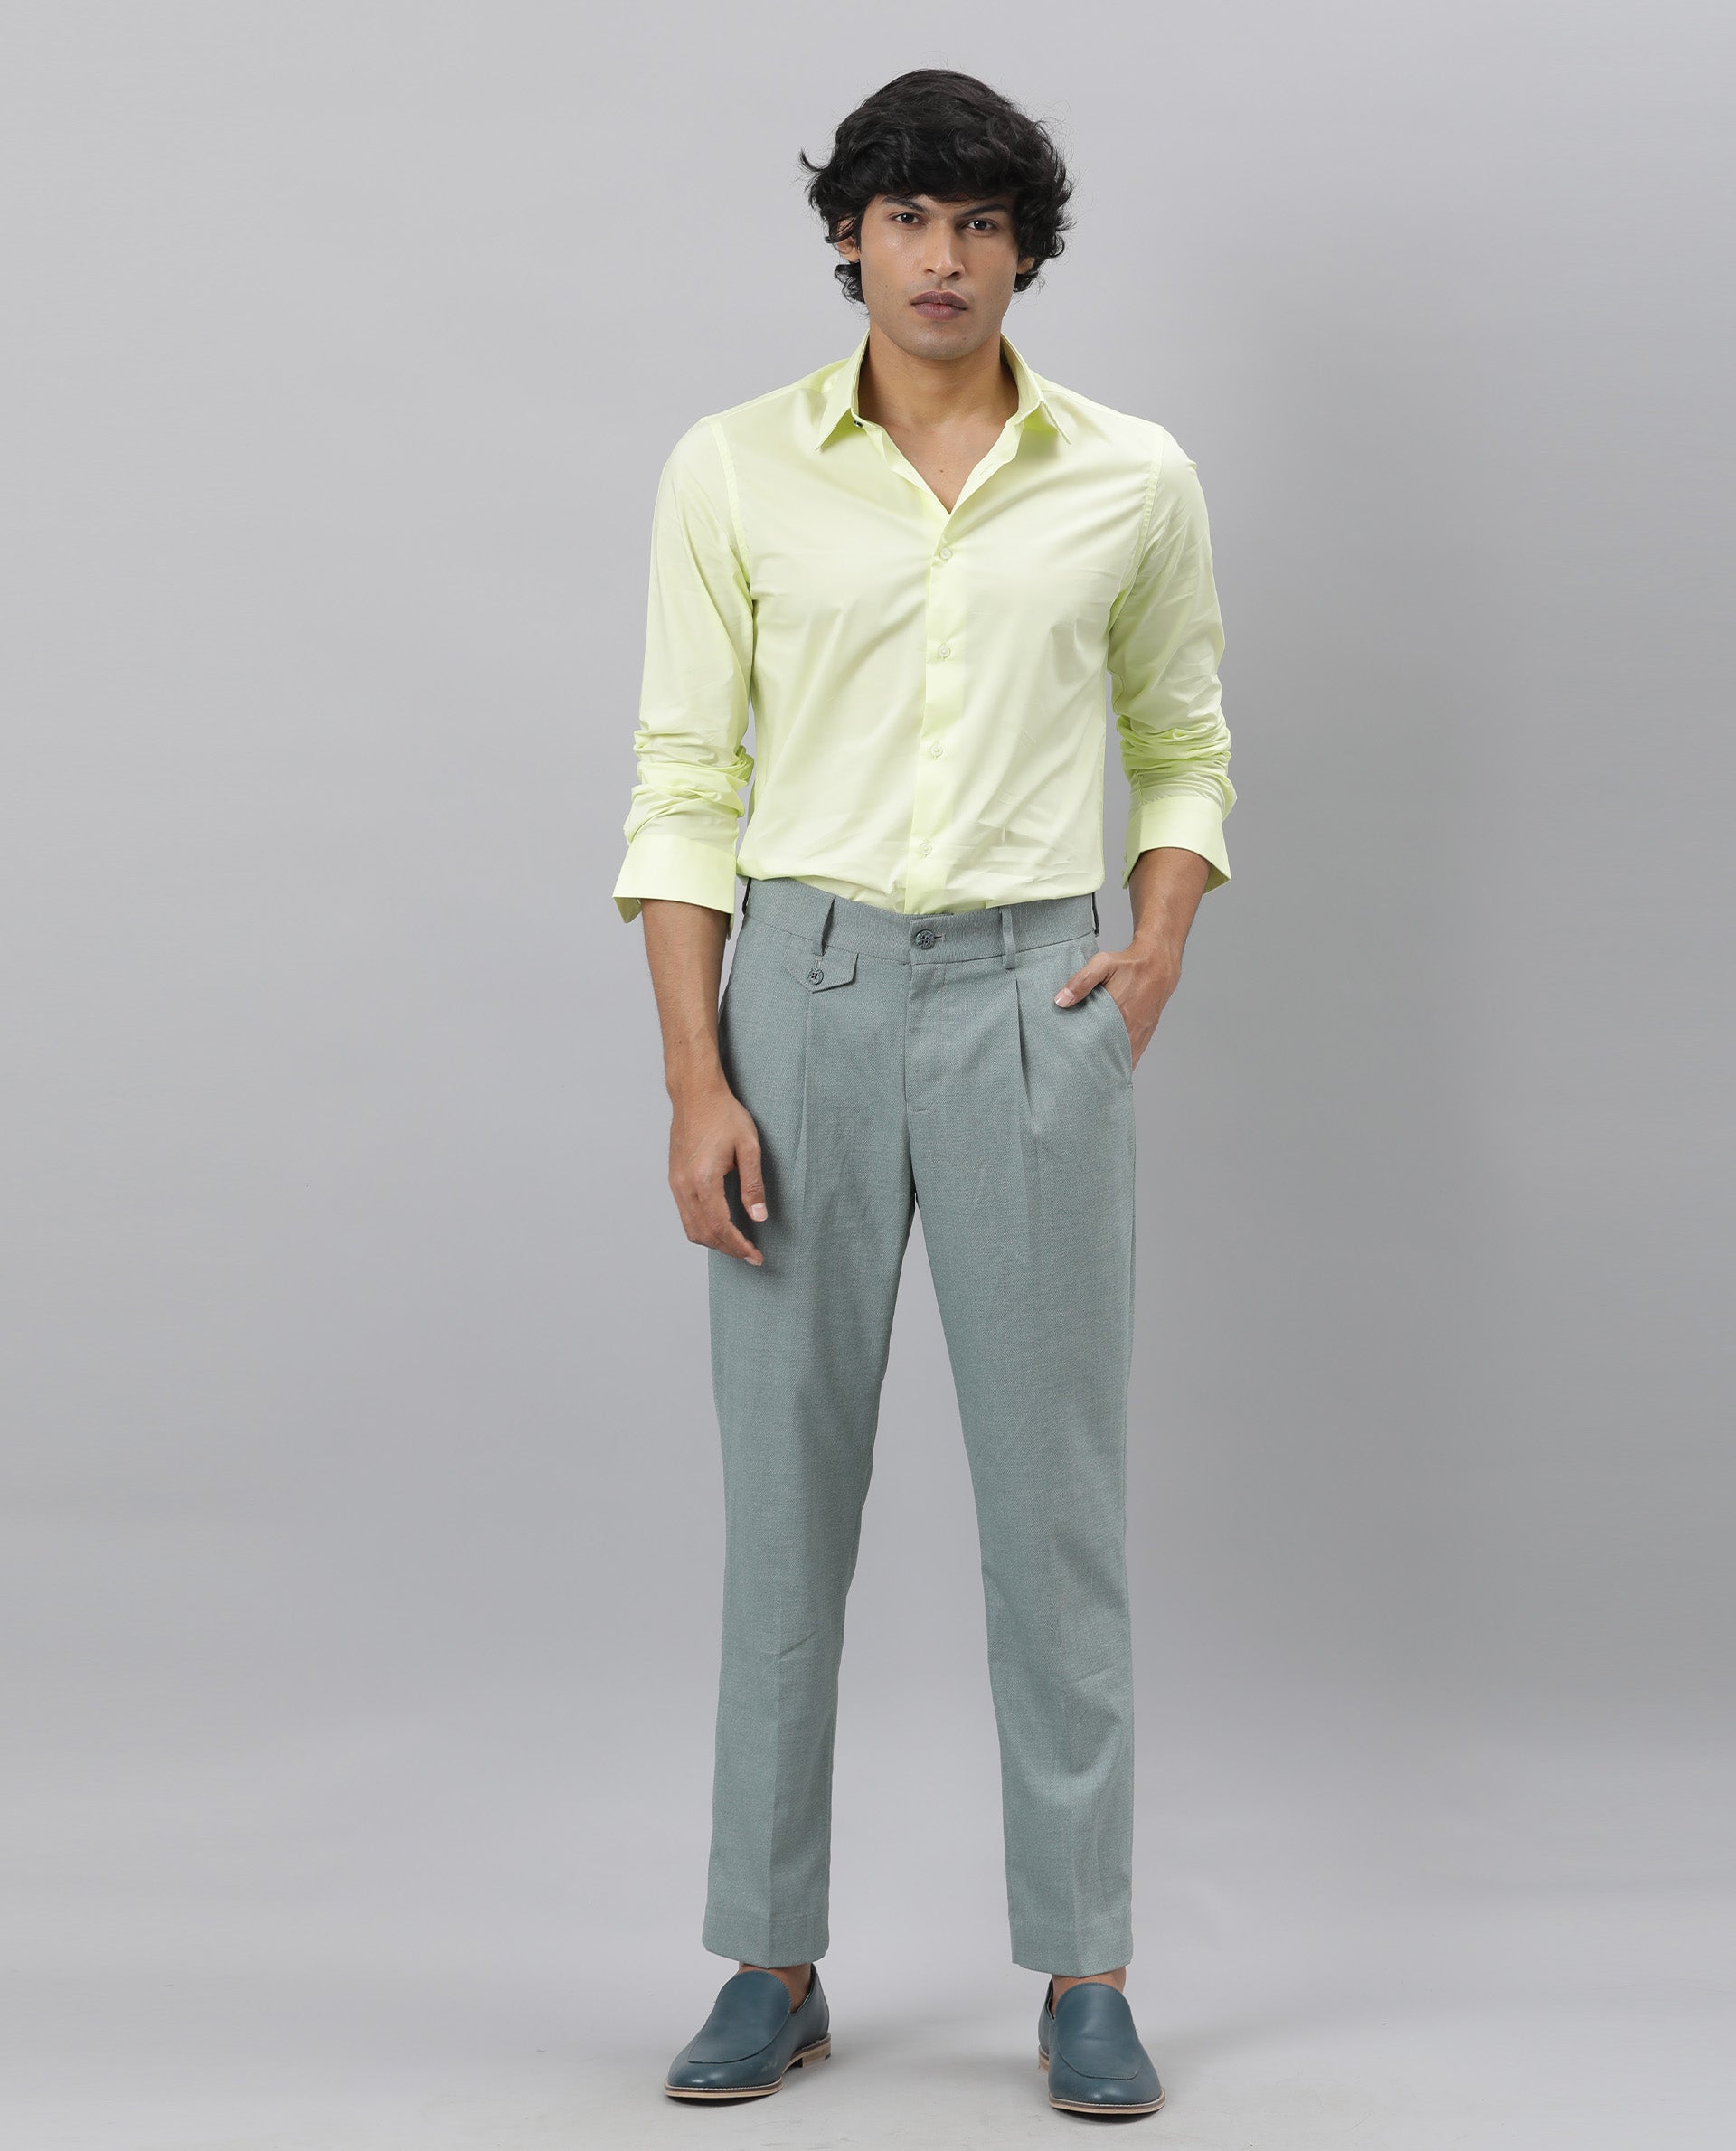 Buy Seafoam Green Chinos for Men Online in India at Beyoung